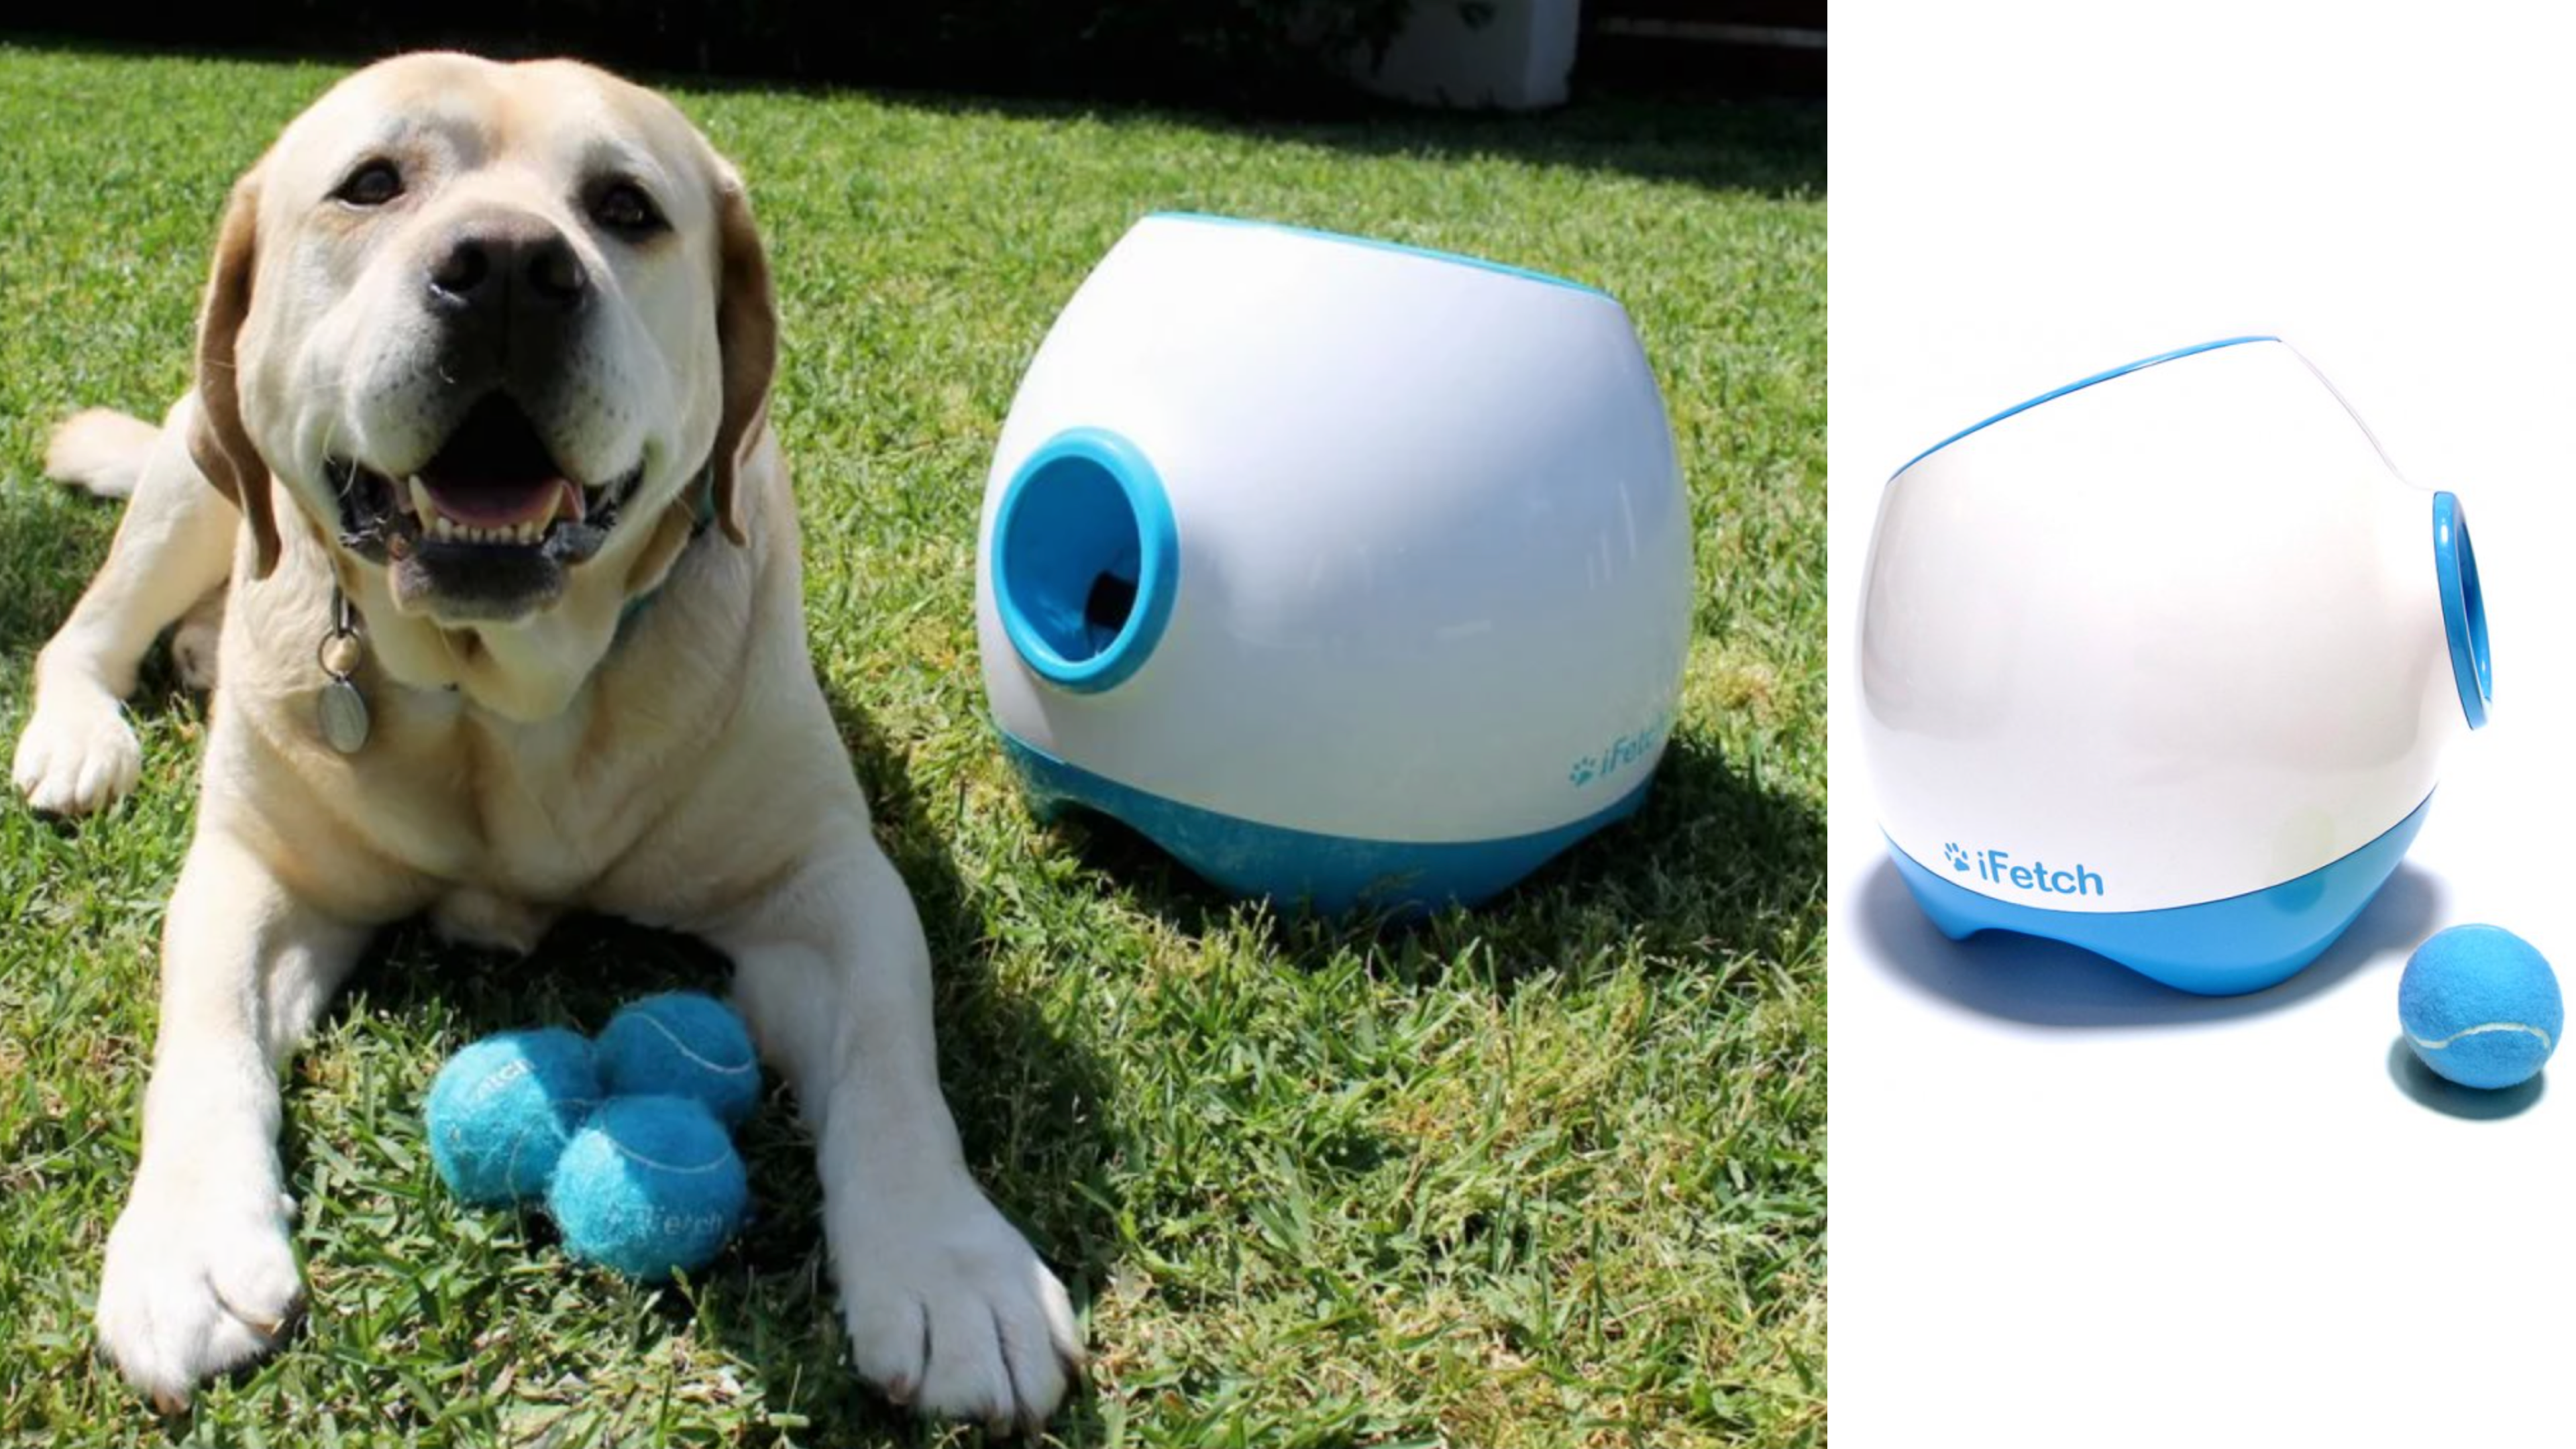 automatic ball thrower for pets who want to play fetch